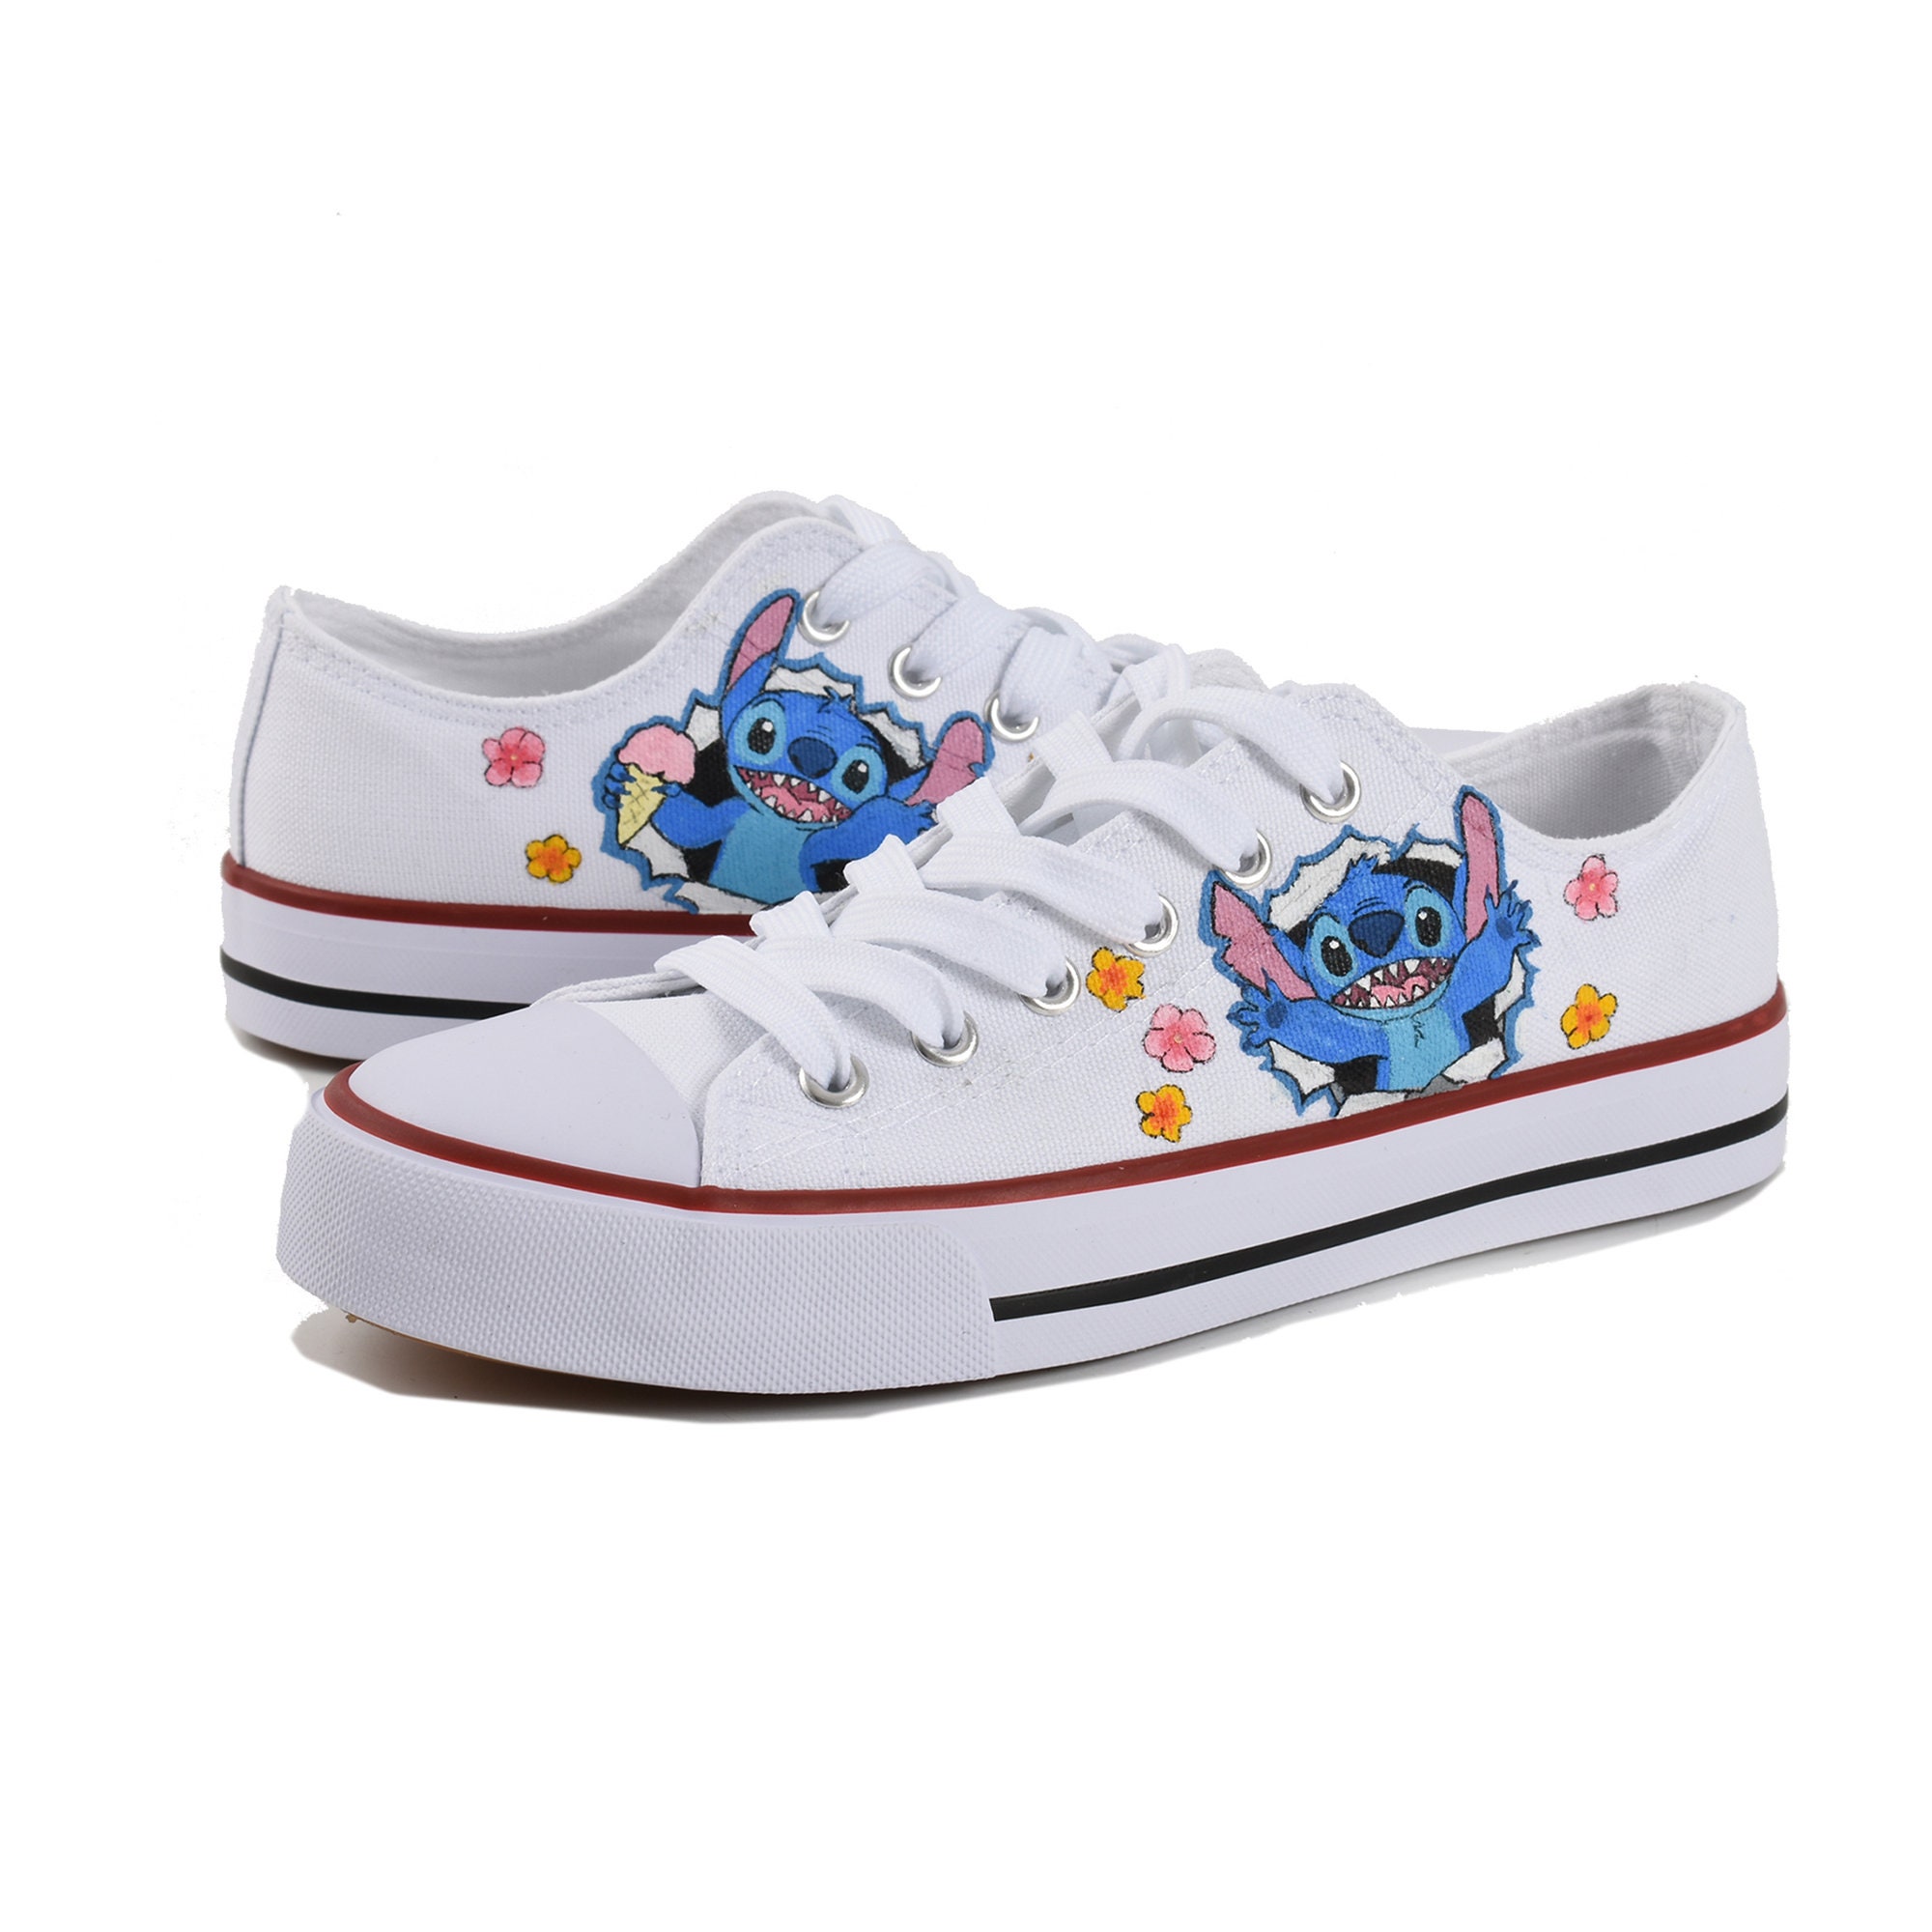 Stitch shoes for kids -  France